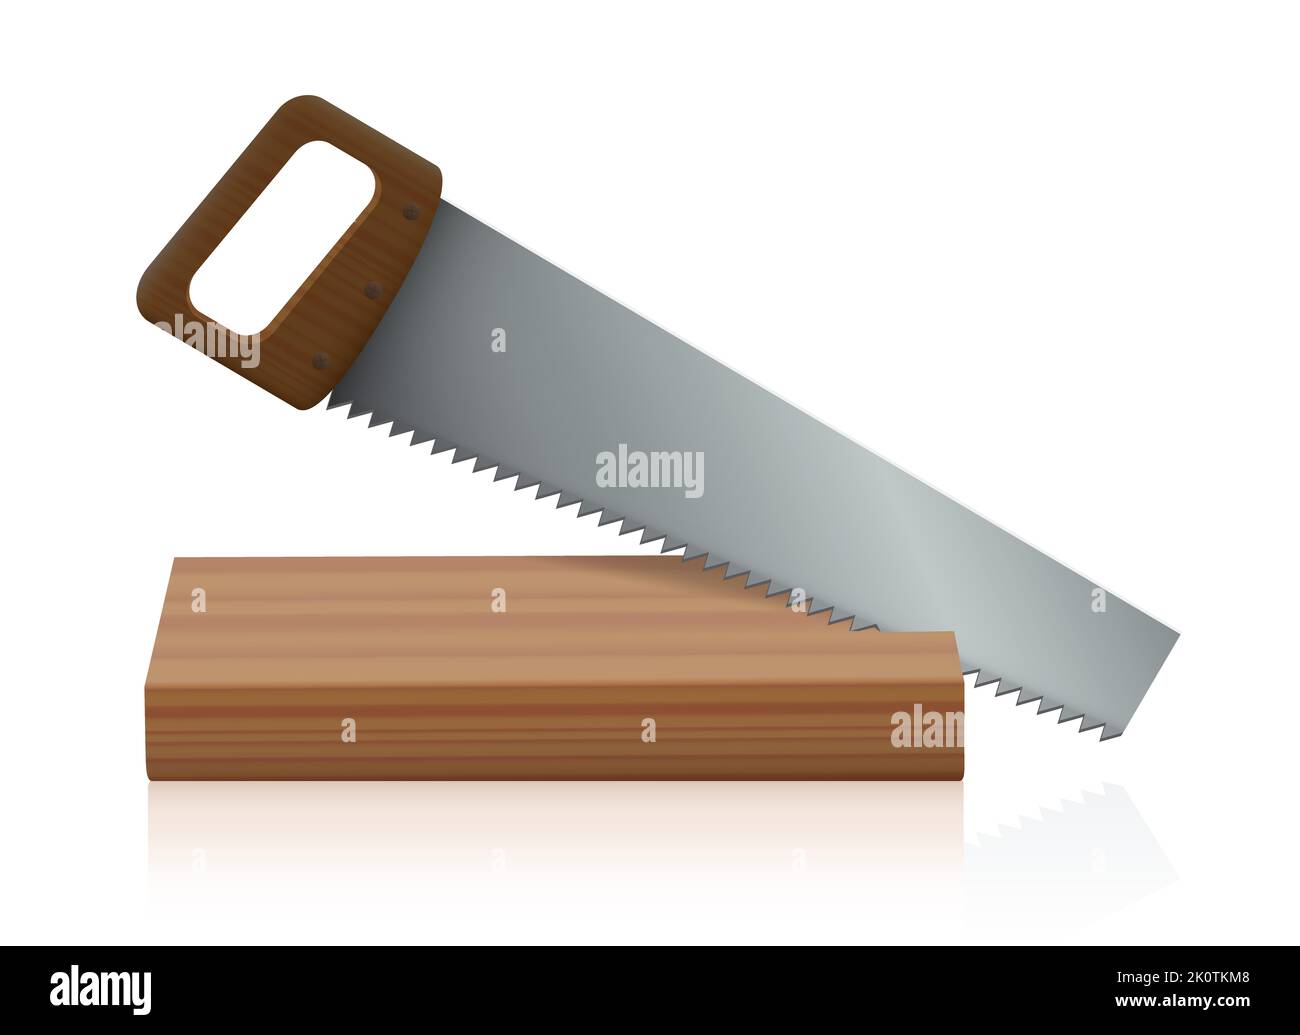 Handsaw, sawing a wooden board. Ripsaw with wooden handle, metal saw blade and pointed sharp saw teeth - illustration on white background. Stock Photo